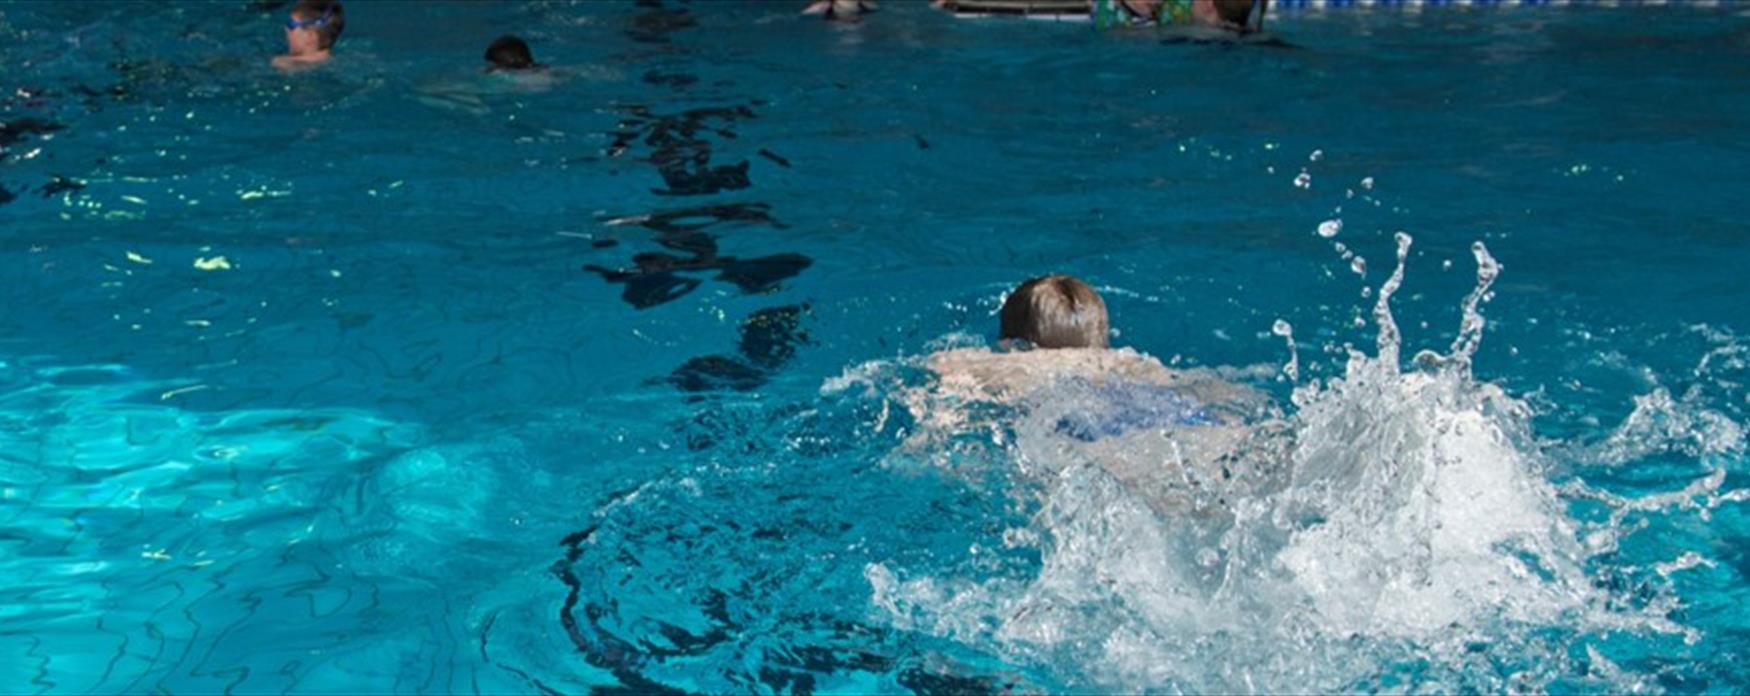 Swimming at Blackwater Leisure Centre